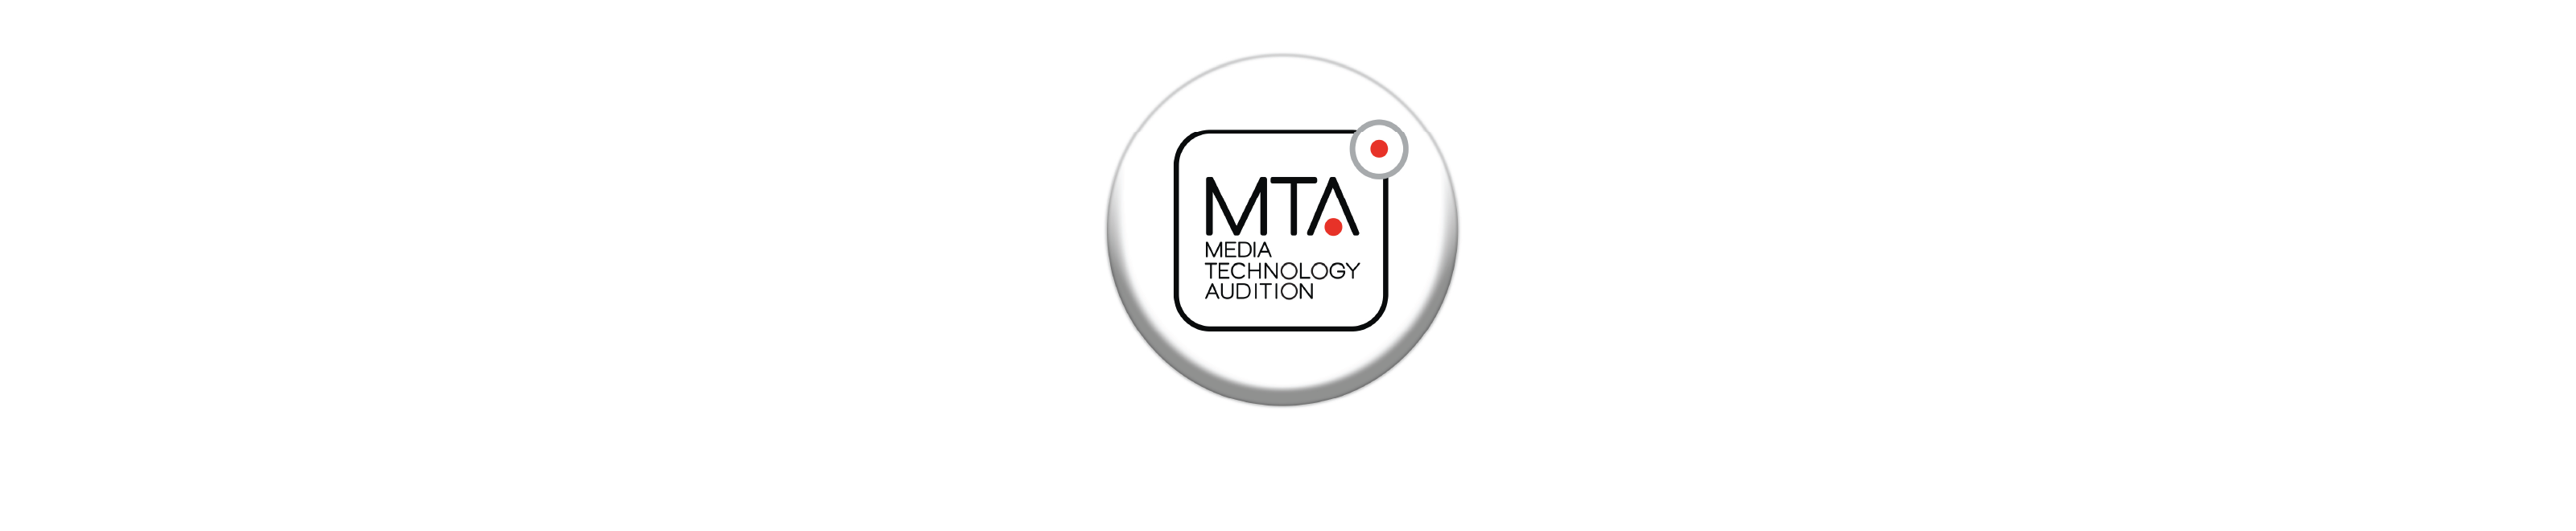 A round circle graphic with Media Technology Audition (MTA) written on it. 